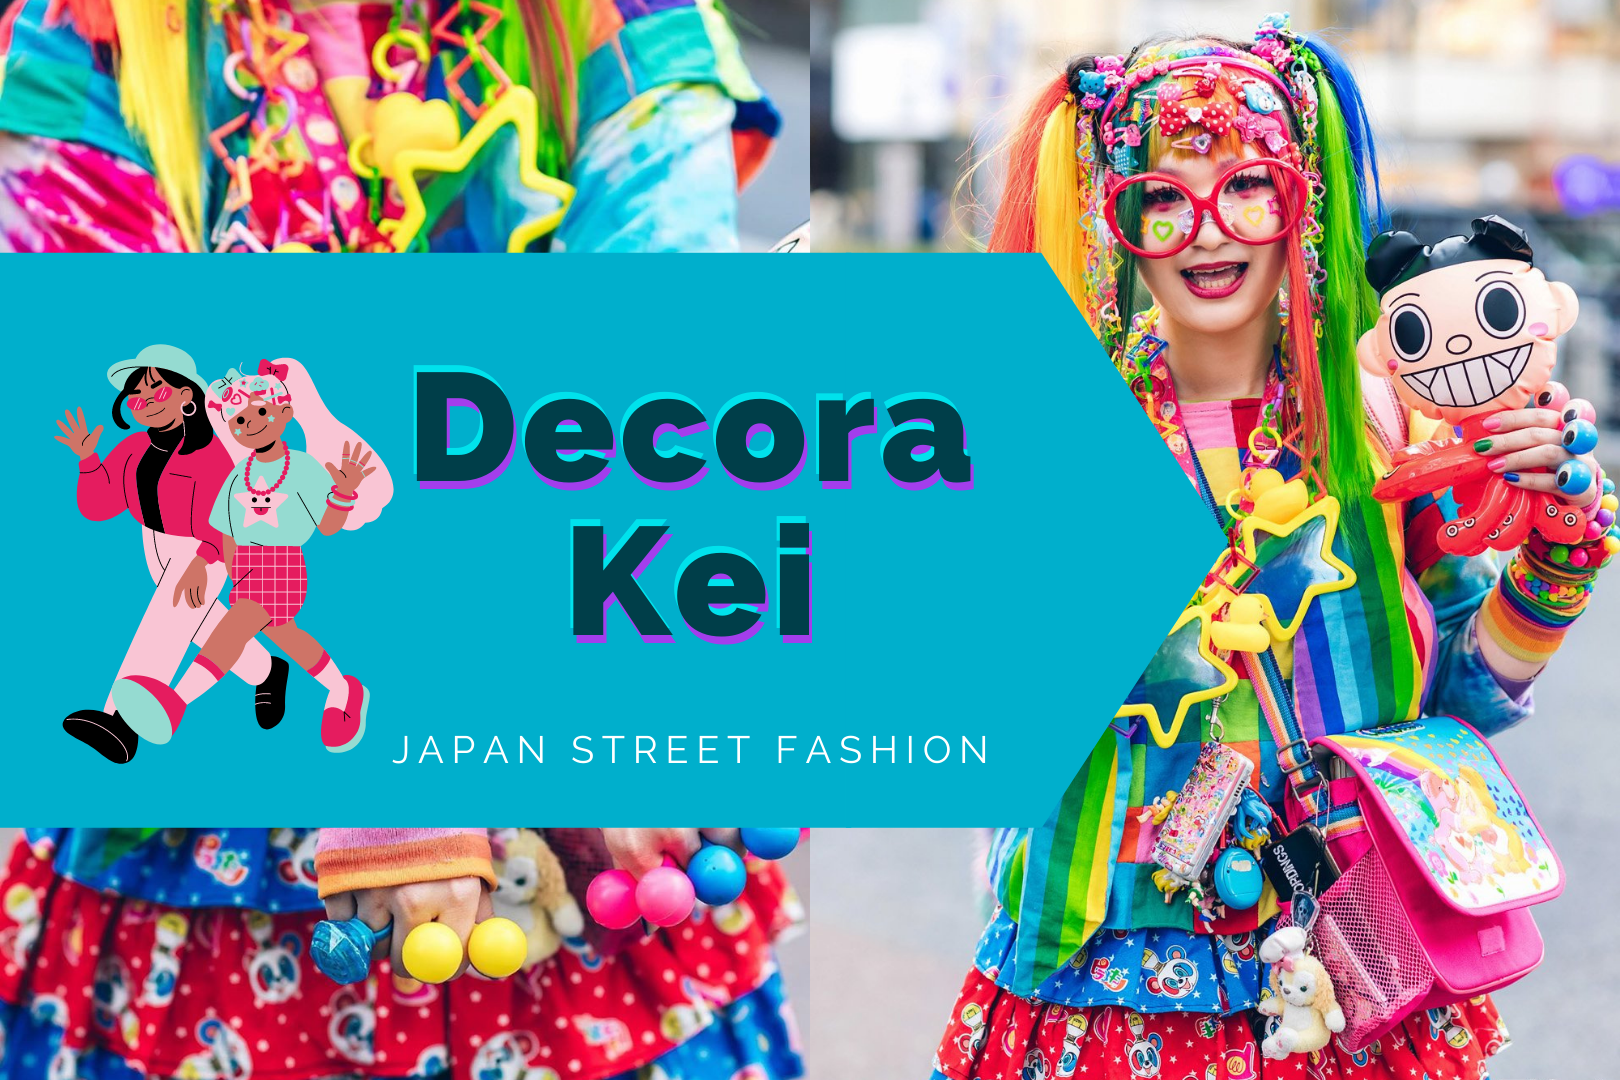 What is Decora Kei?